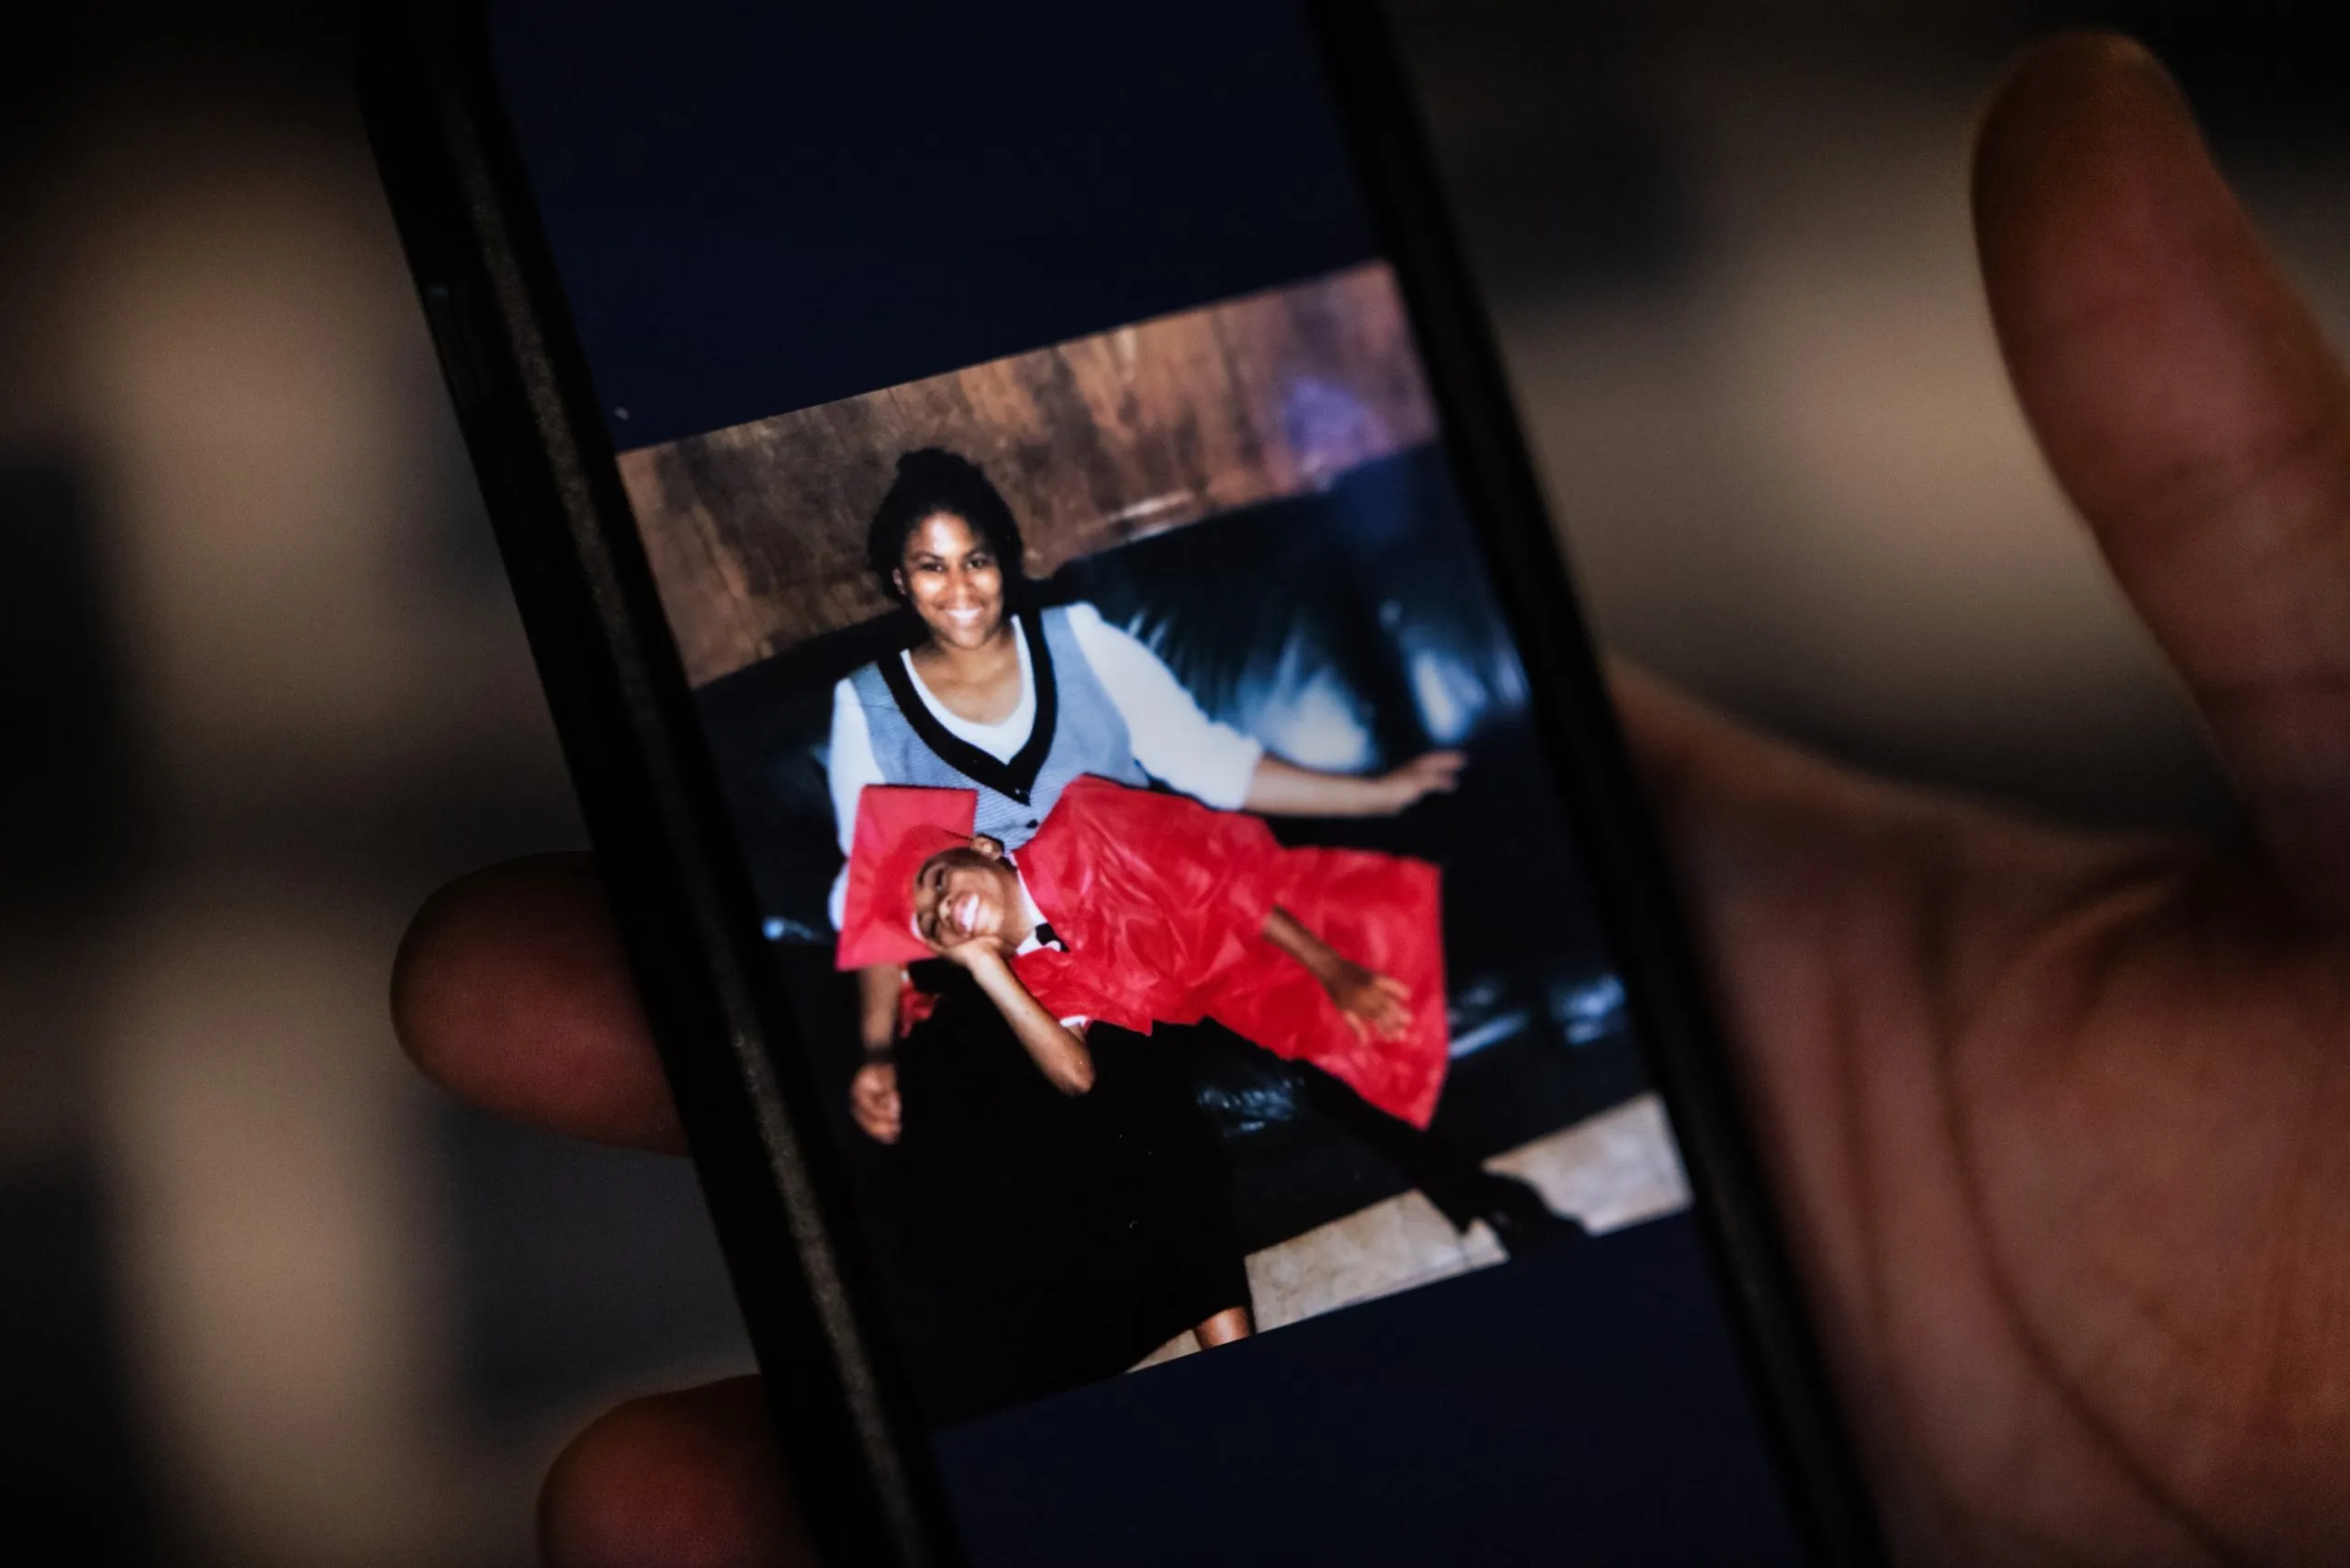 Aaron Morris, 27, shows a photo of him and his mother, Richelle, from elementary school on his cellphone at his Jefferson City, Mo., home in August. Richelle, who was found mentally incapacitated in 2003, is currently in a vegetative state after having a heart attack in the Harris County Jail in February. ©Marie D. De Jesús/Houston Landing